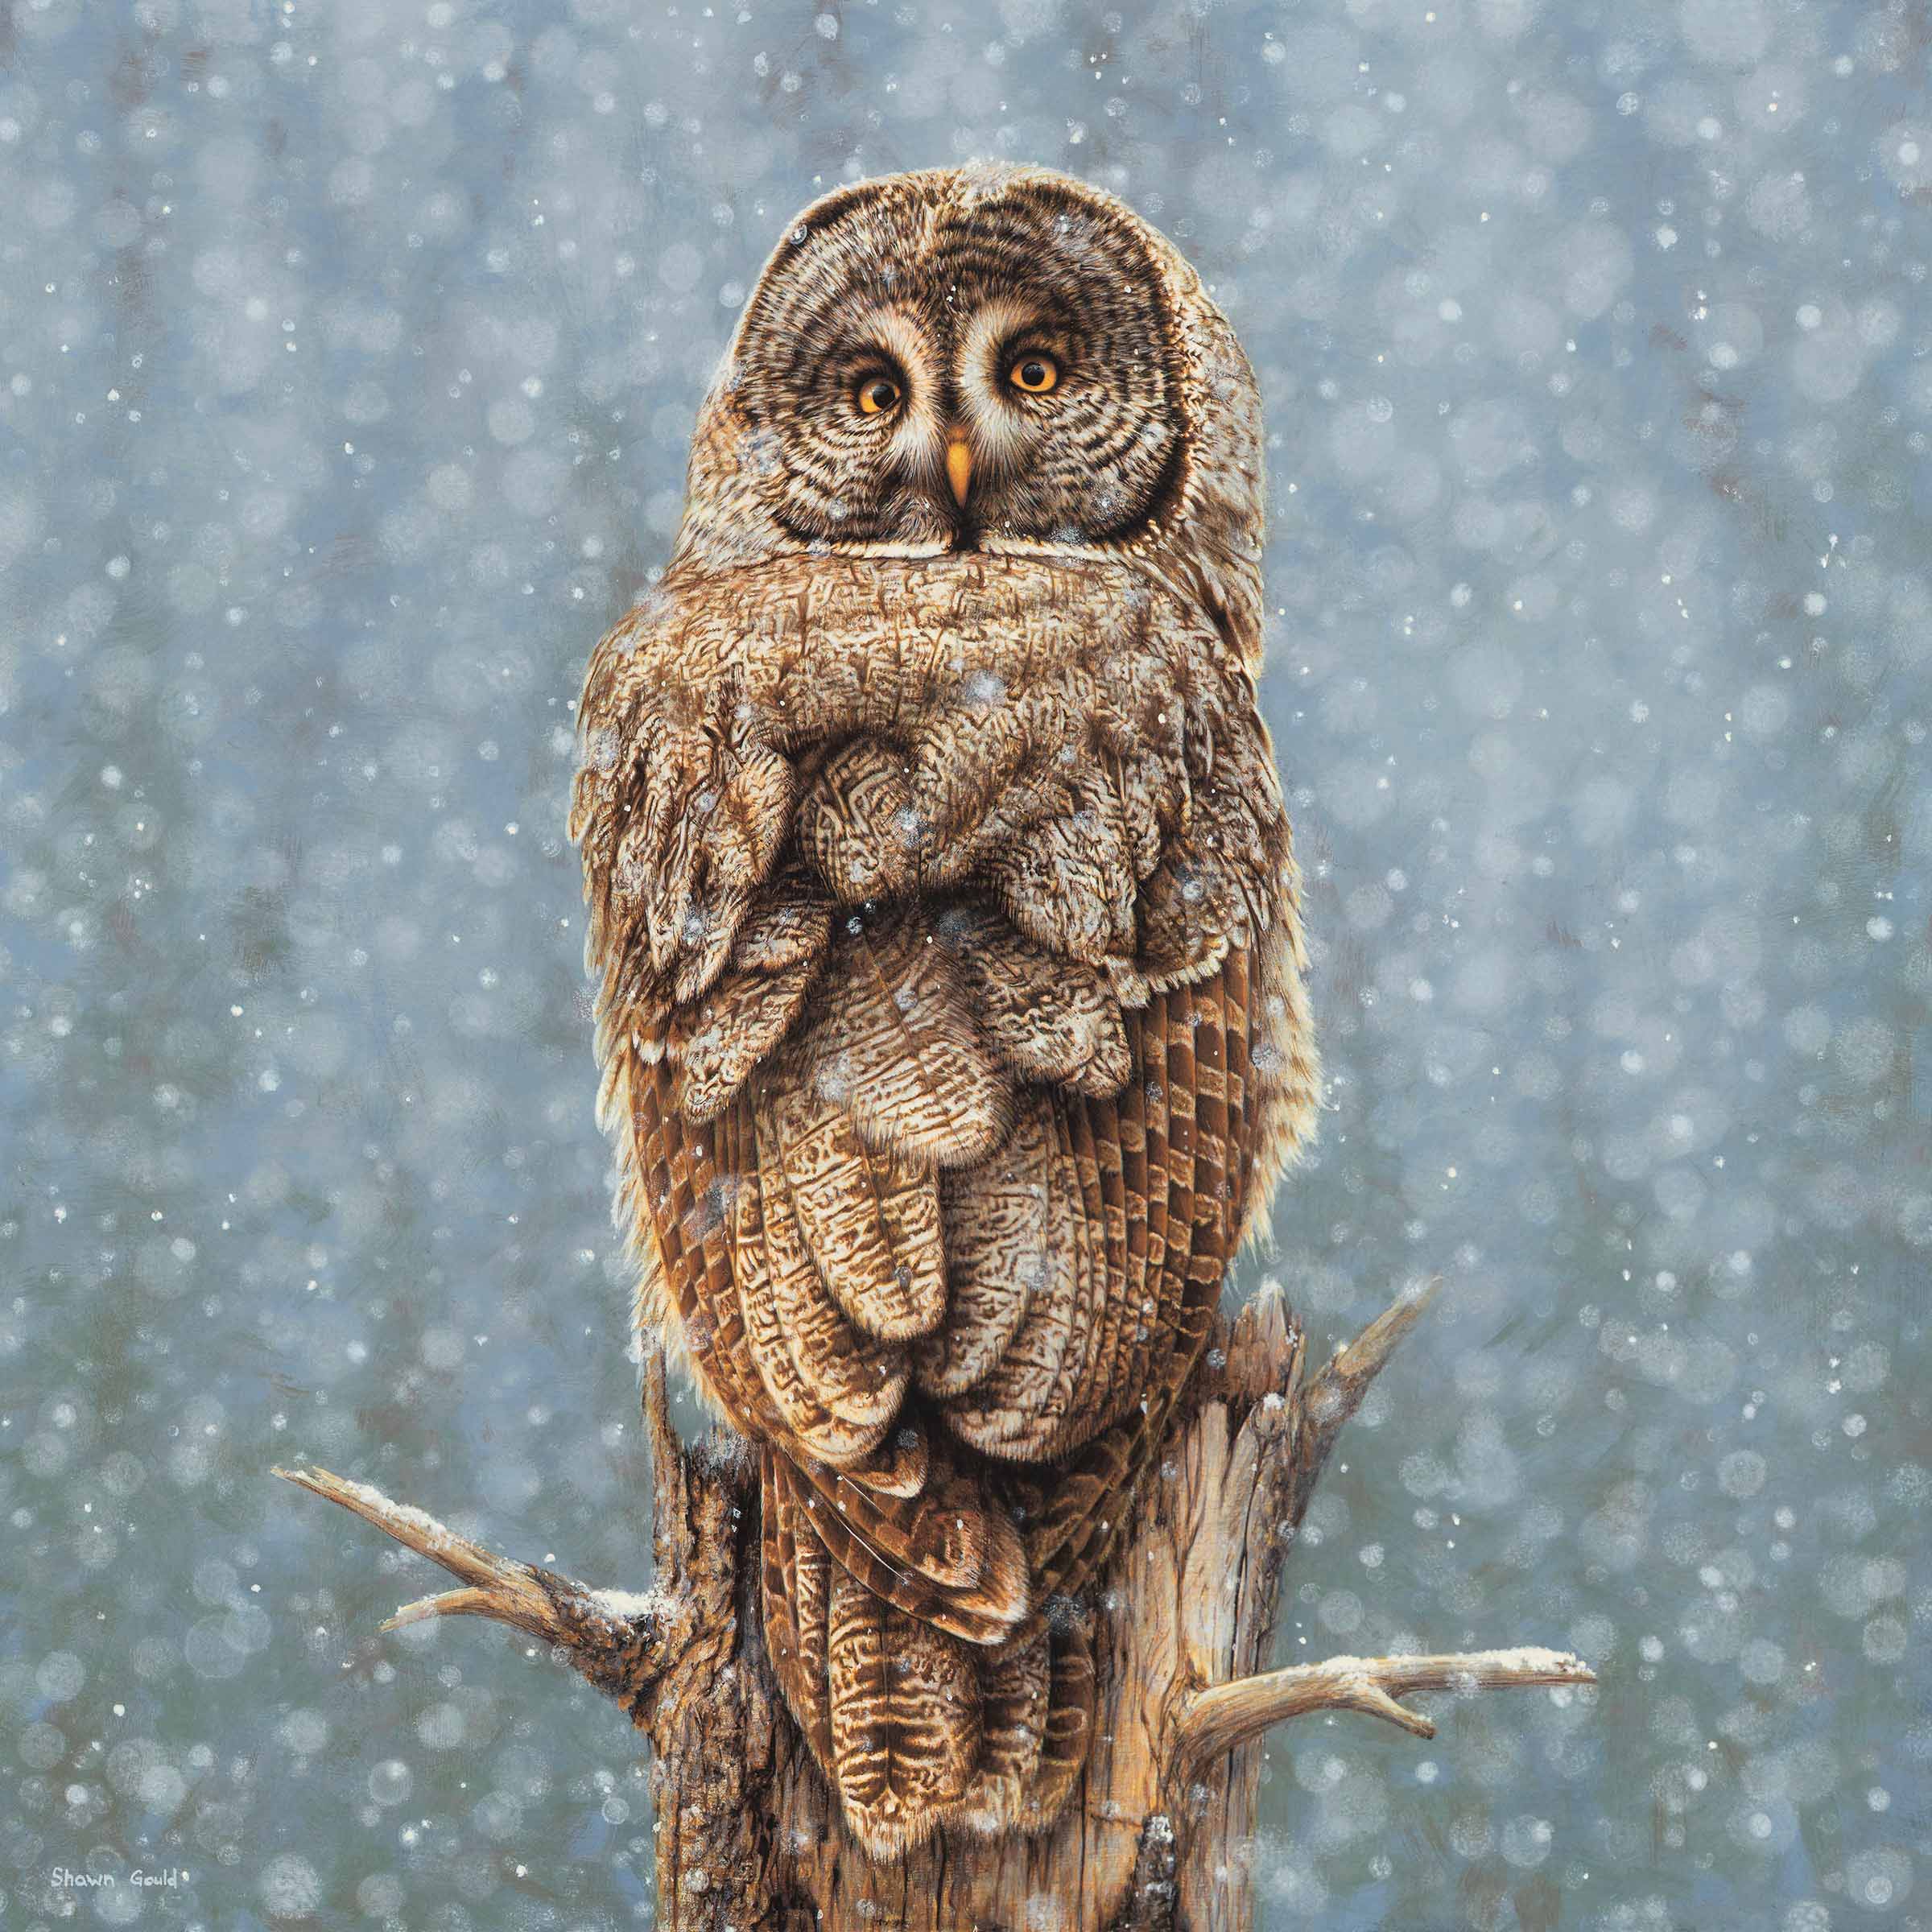 SG – Great Gray Owl in Snow © Shawn Gould